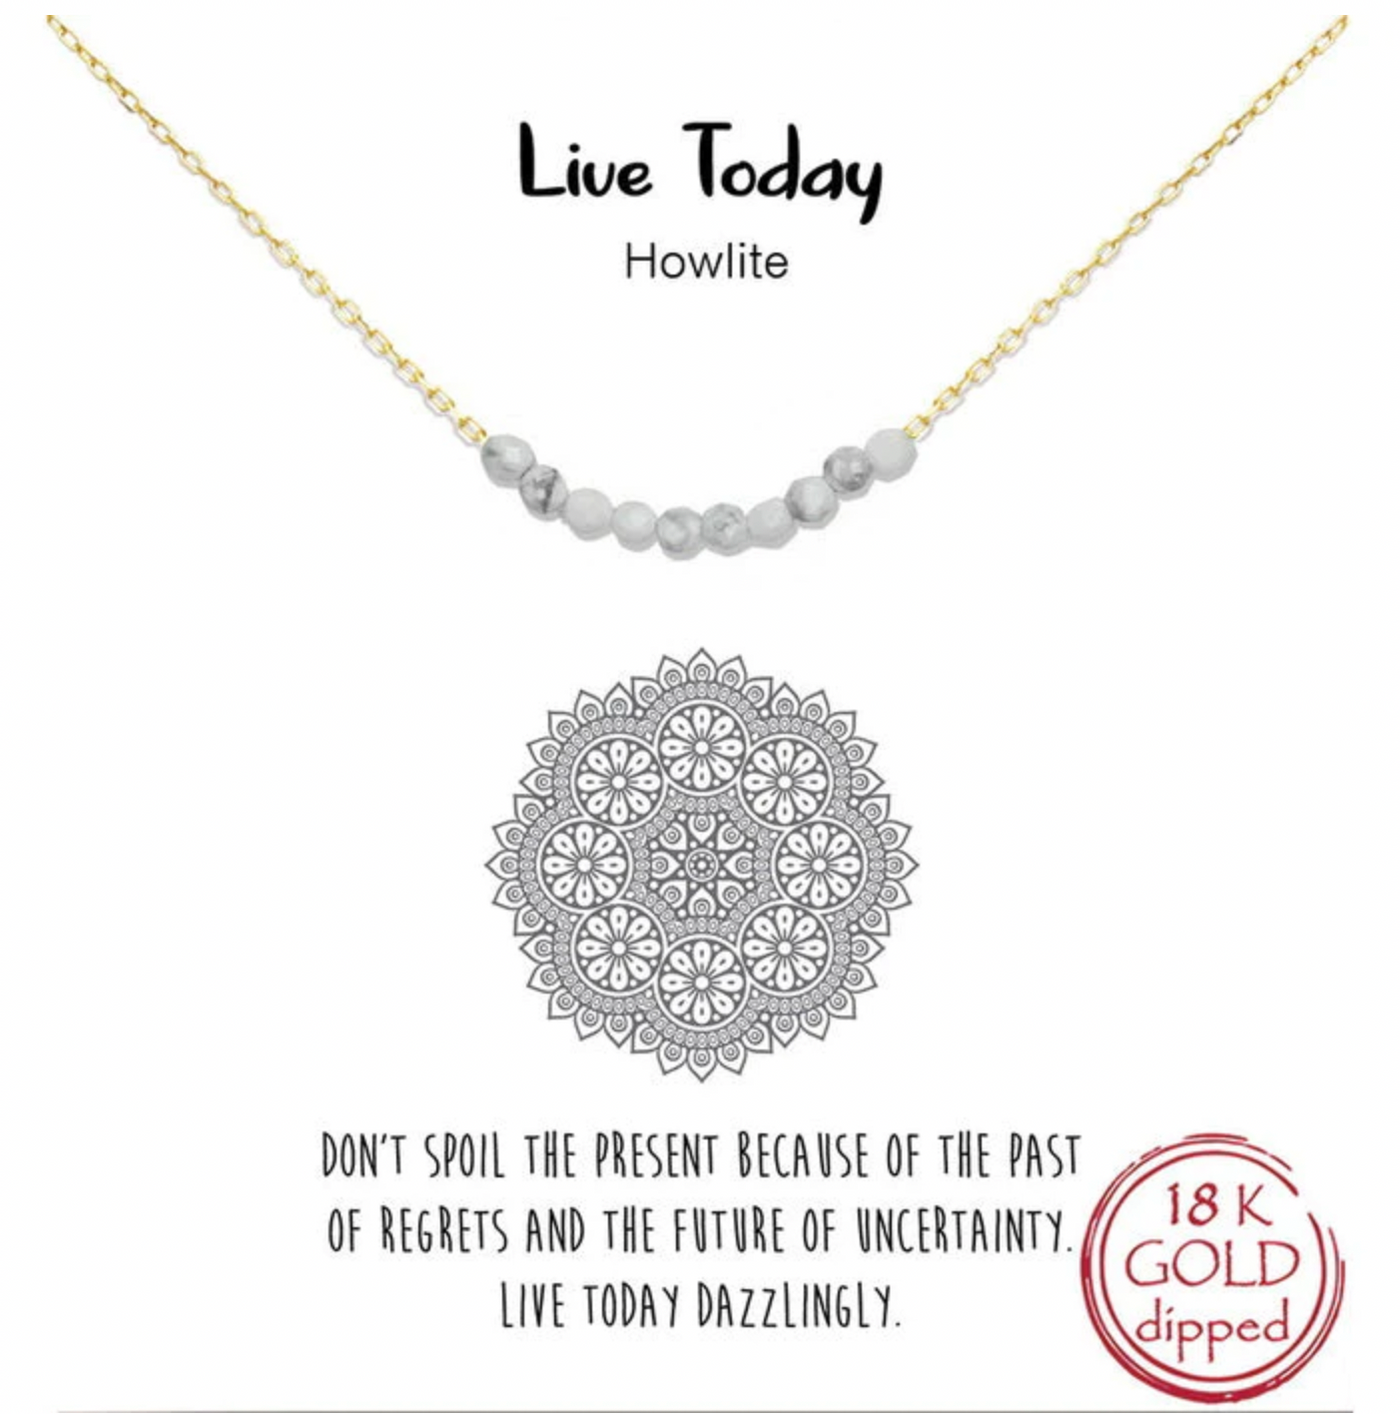 LIVE TODAY Natural Stone Bead Short Chain Necklace - Howlite